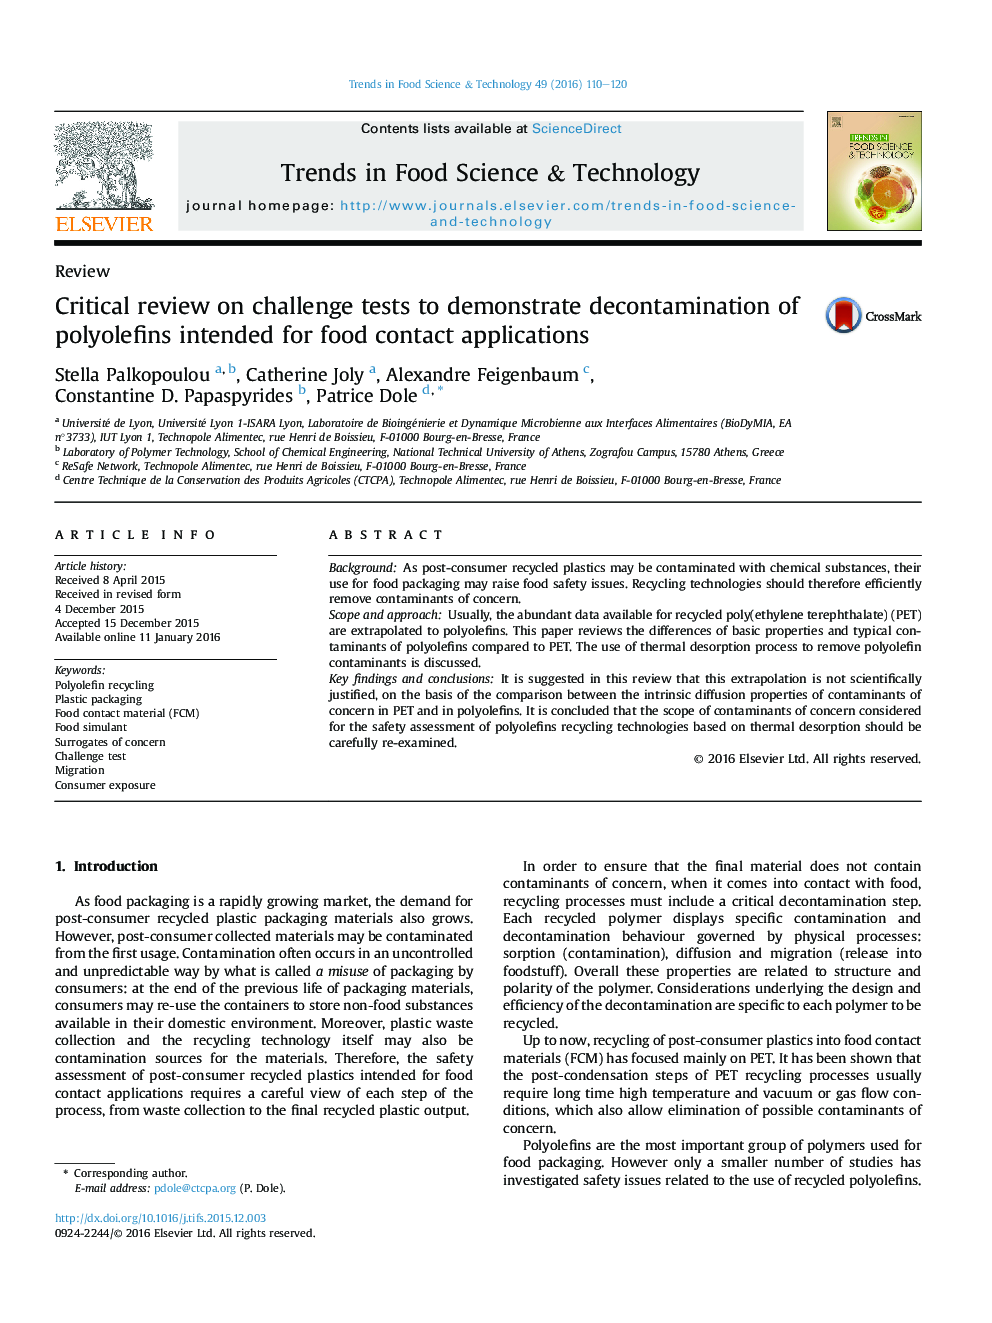 Critical review on challenge tests to demonstrate decontamination of polyolefins intended for food contact applications